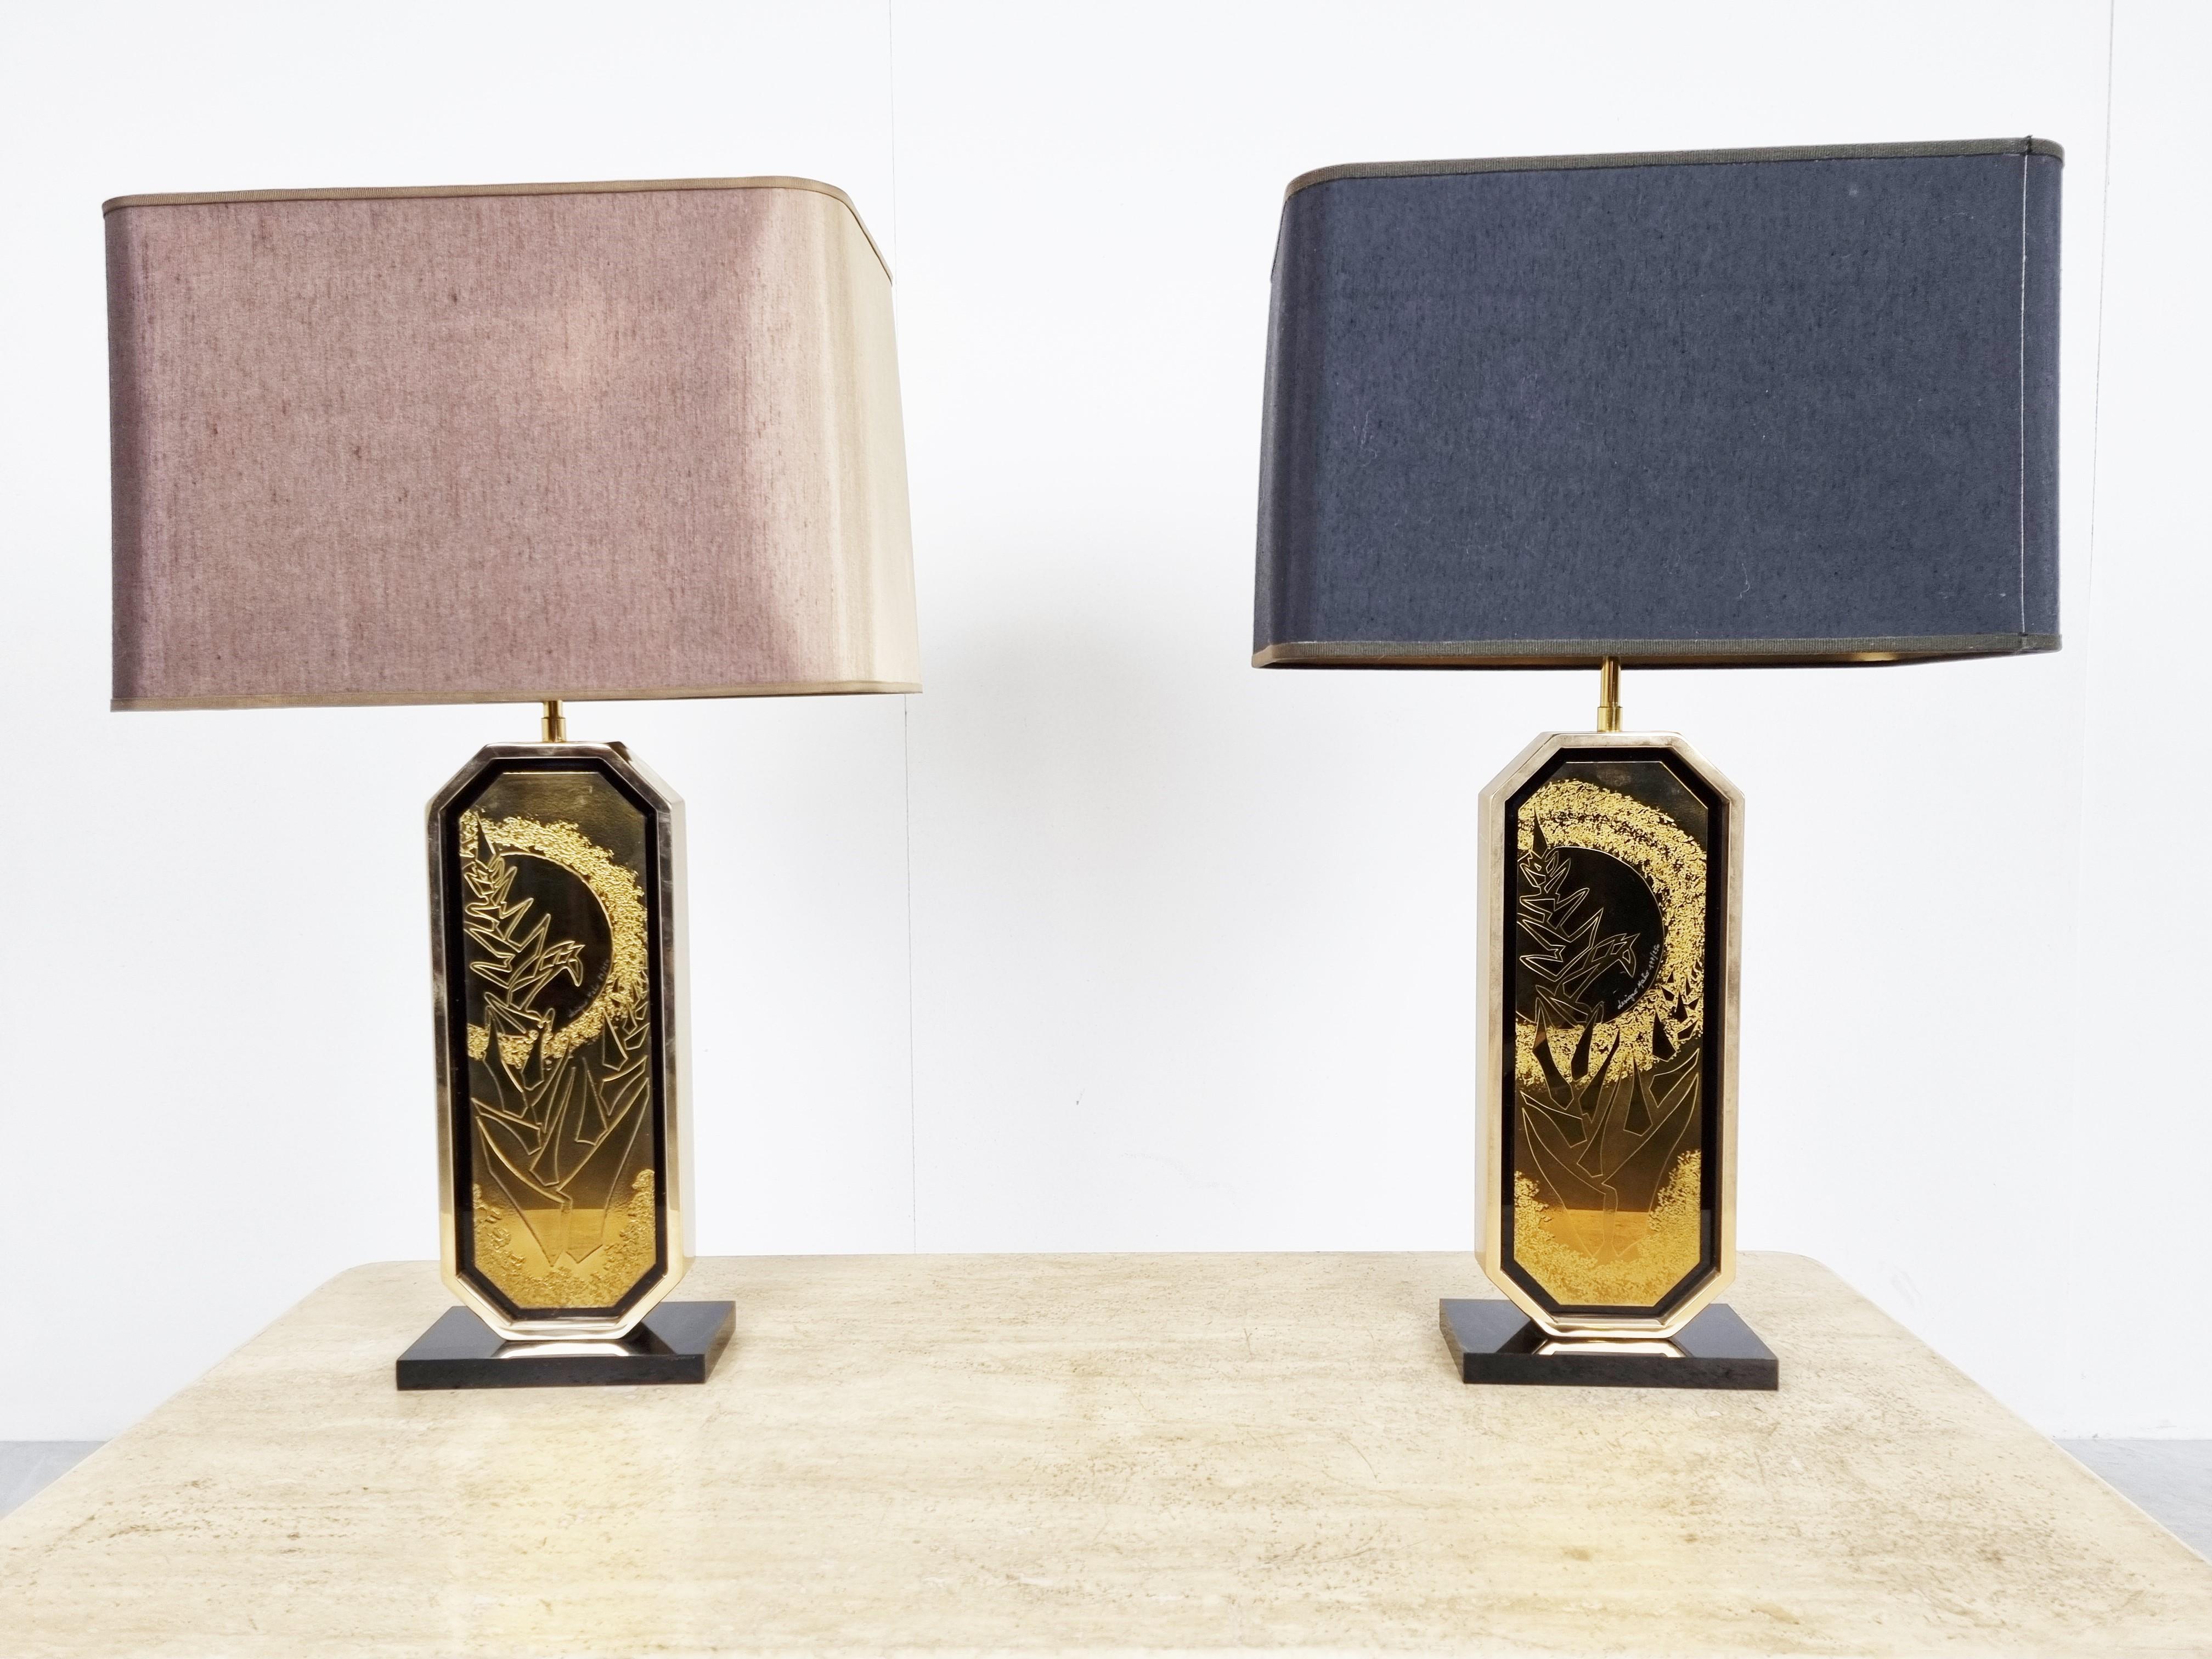 Pair of Hollywood Regency table lamps designed by Georges Mathias in the 1970s and produced by Belgochrom.

The lamps consist of a black lacquered base, a 23kt brass frame holding the etched artwork and finished with the original lamp shades.